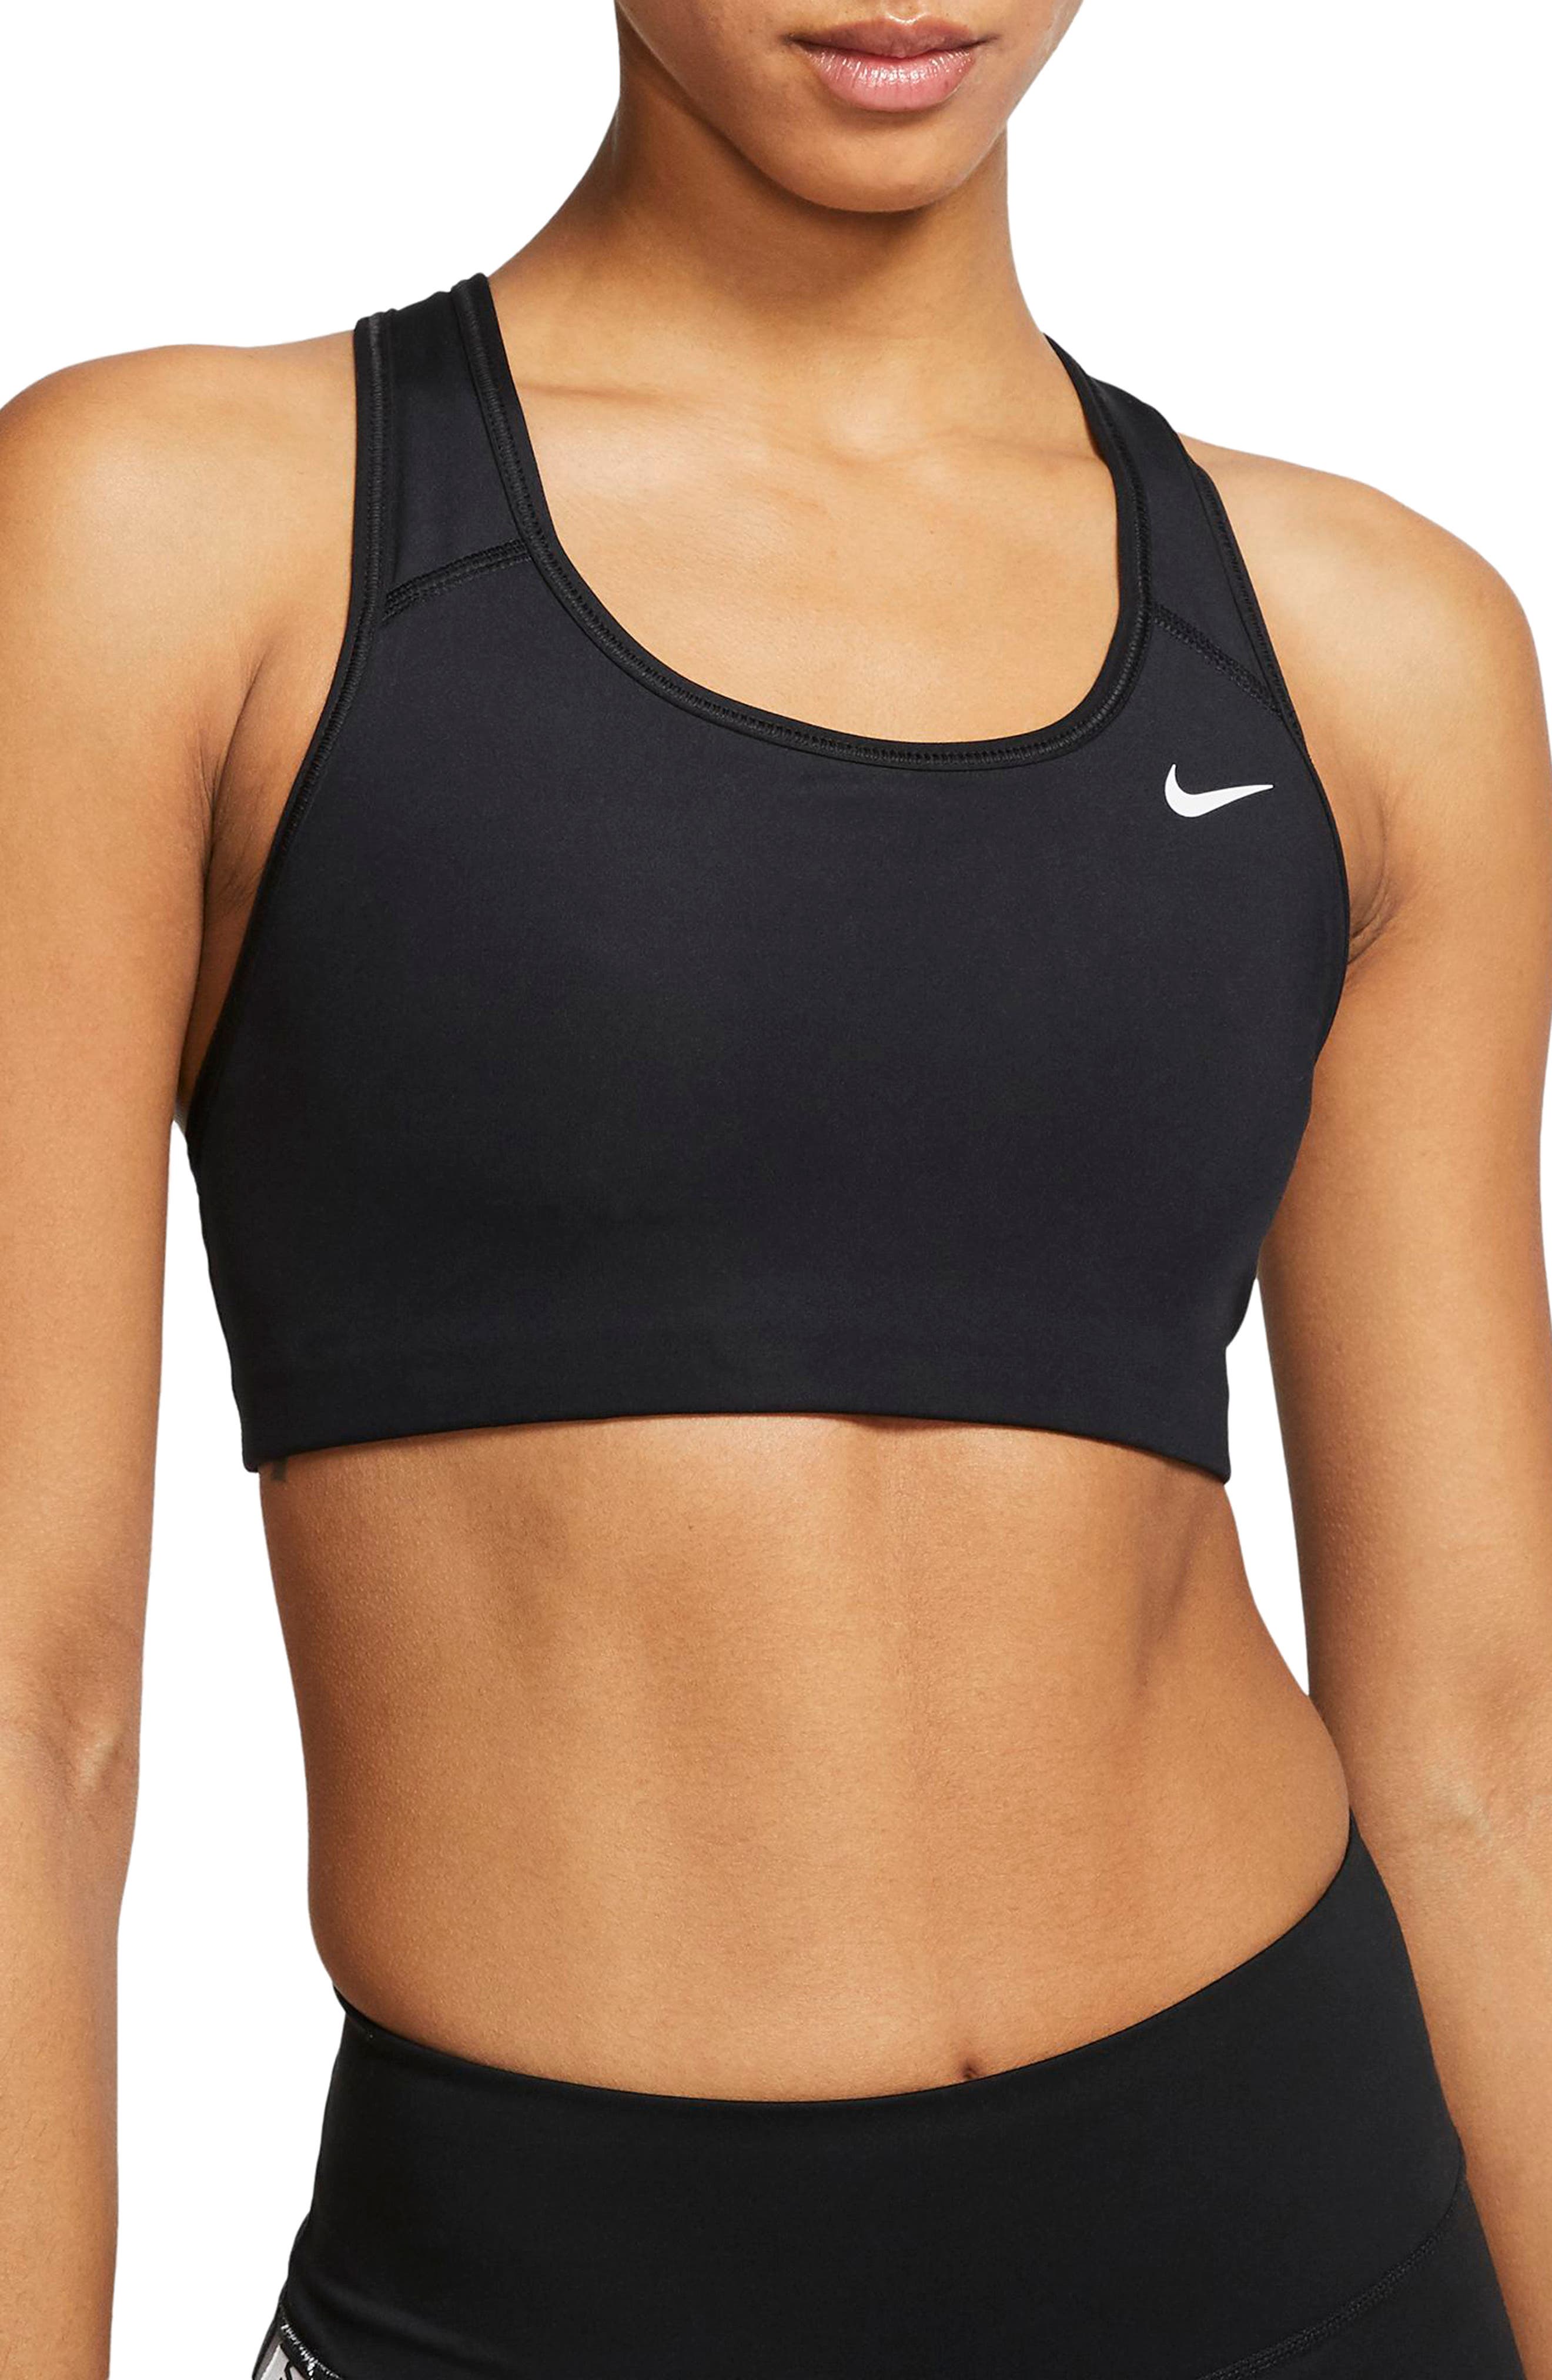 Nike Sports Bras for sale in San Diego, California, Facebook Marketplace